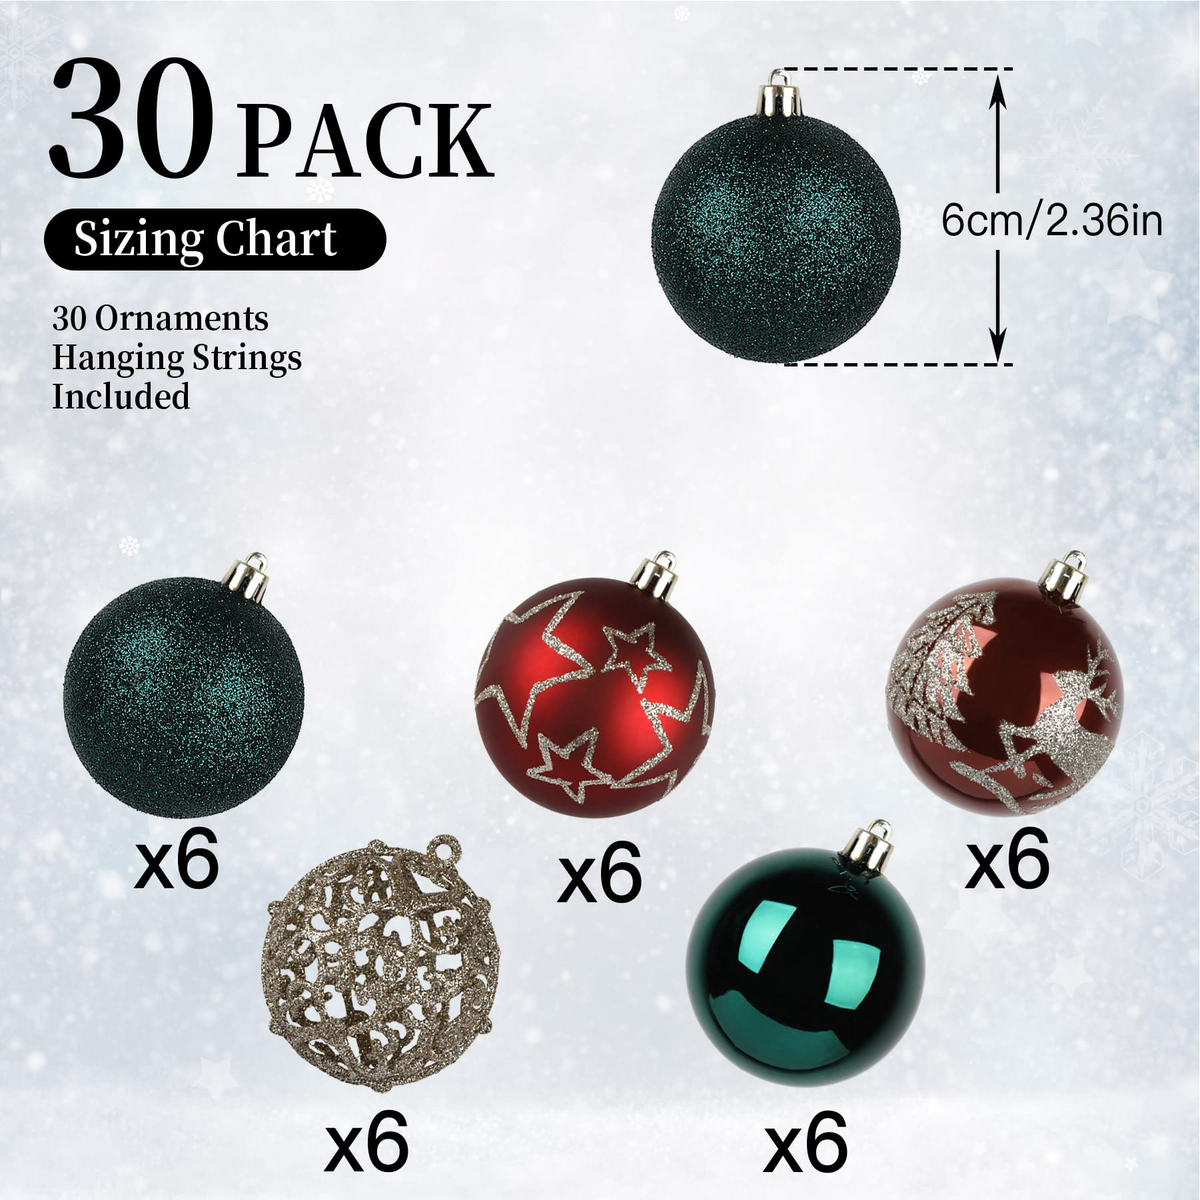 SHareconn 30ct 60mm/2.36" Christmas Balls Ornaments, Shatterproof Plastic Decorative Baubles for Xmas Tree Decor Holiday Wedding Party Decoration with Hooks Included